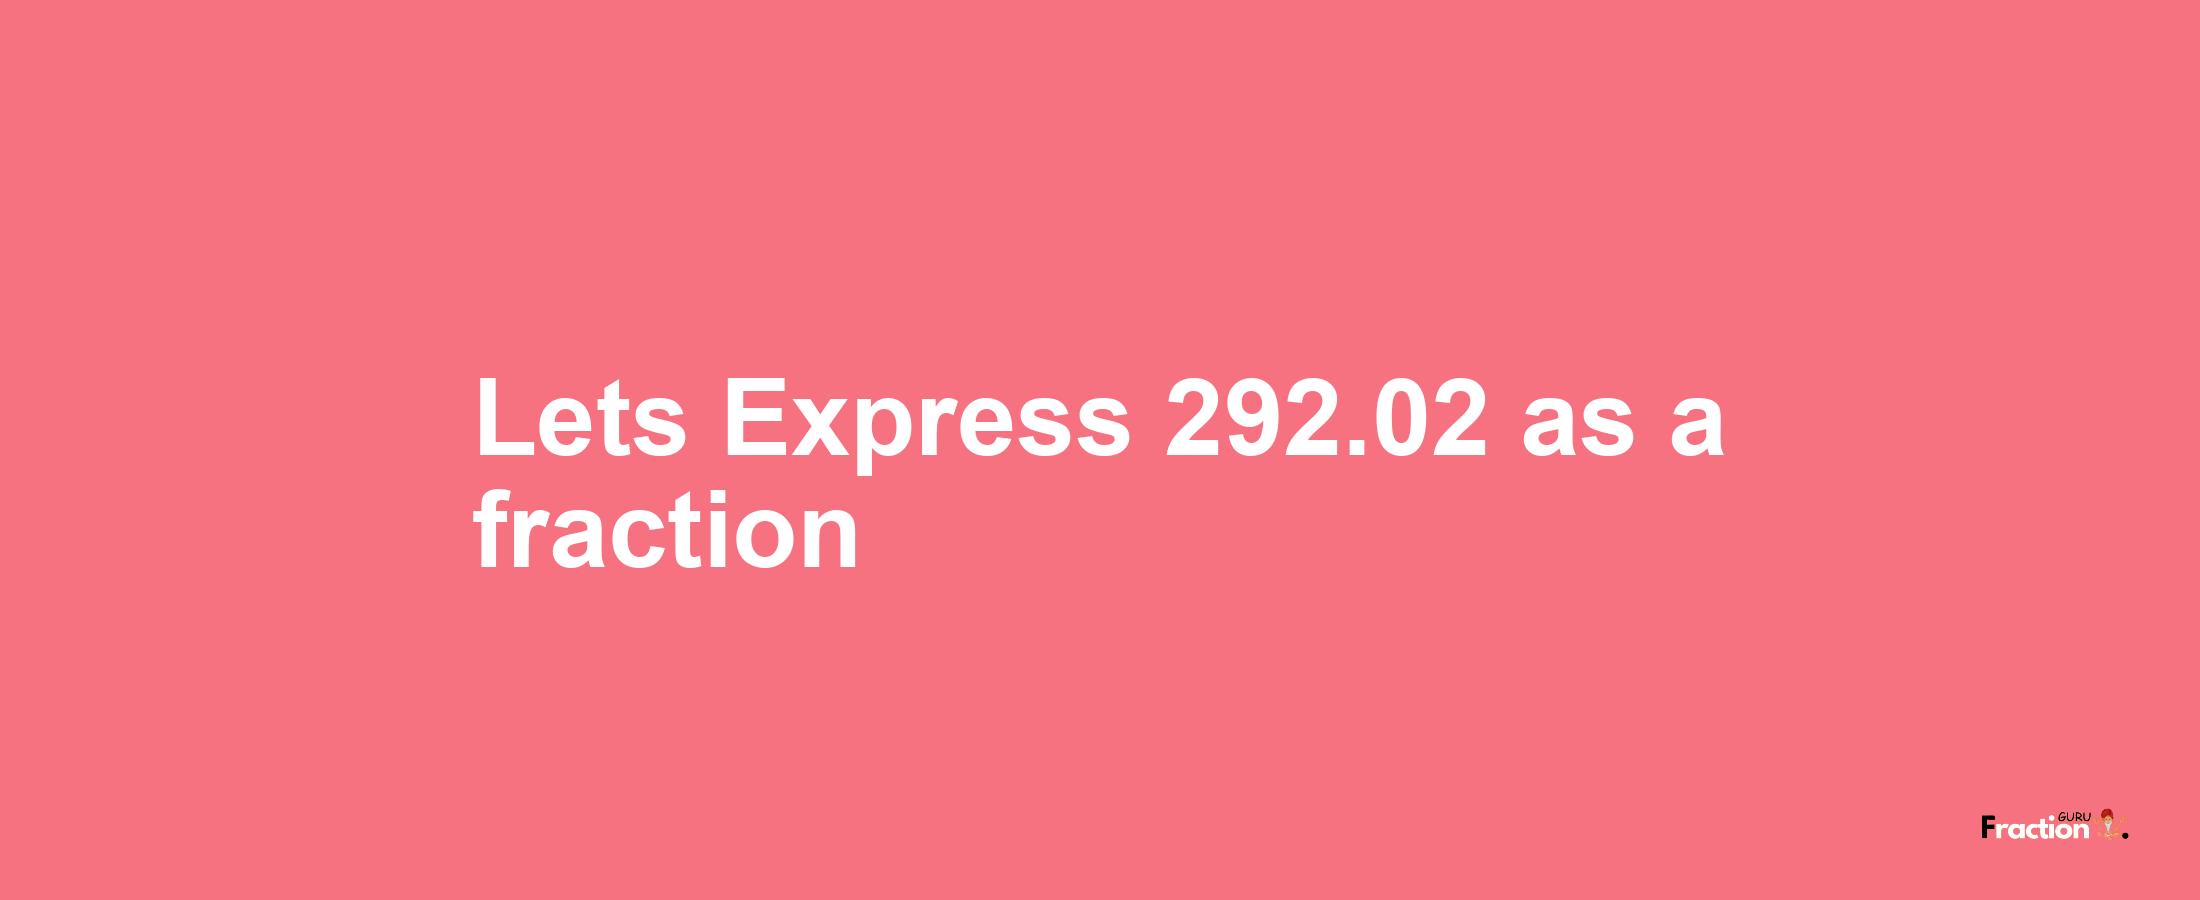 Lets Express 292.02 as afraction